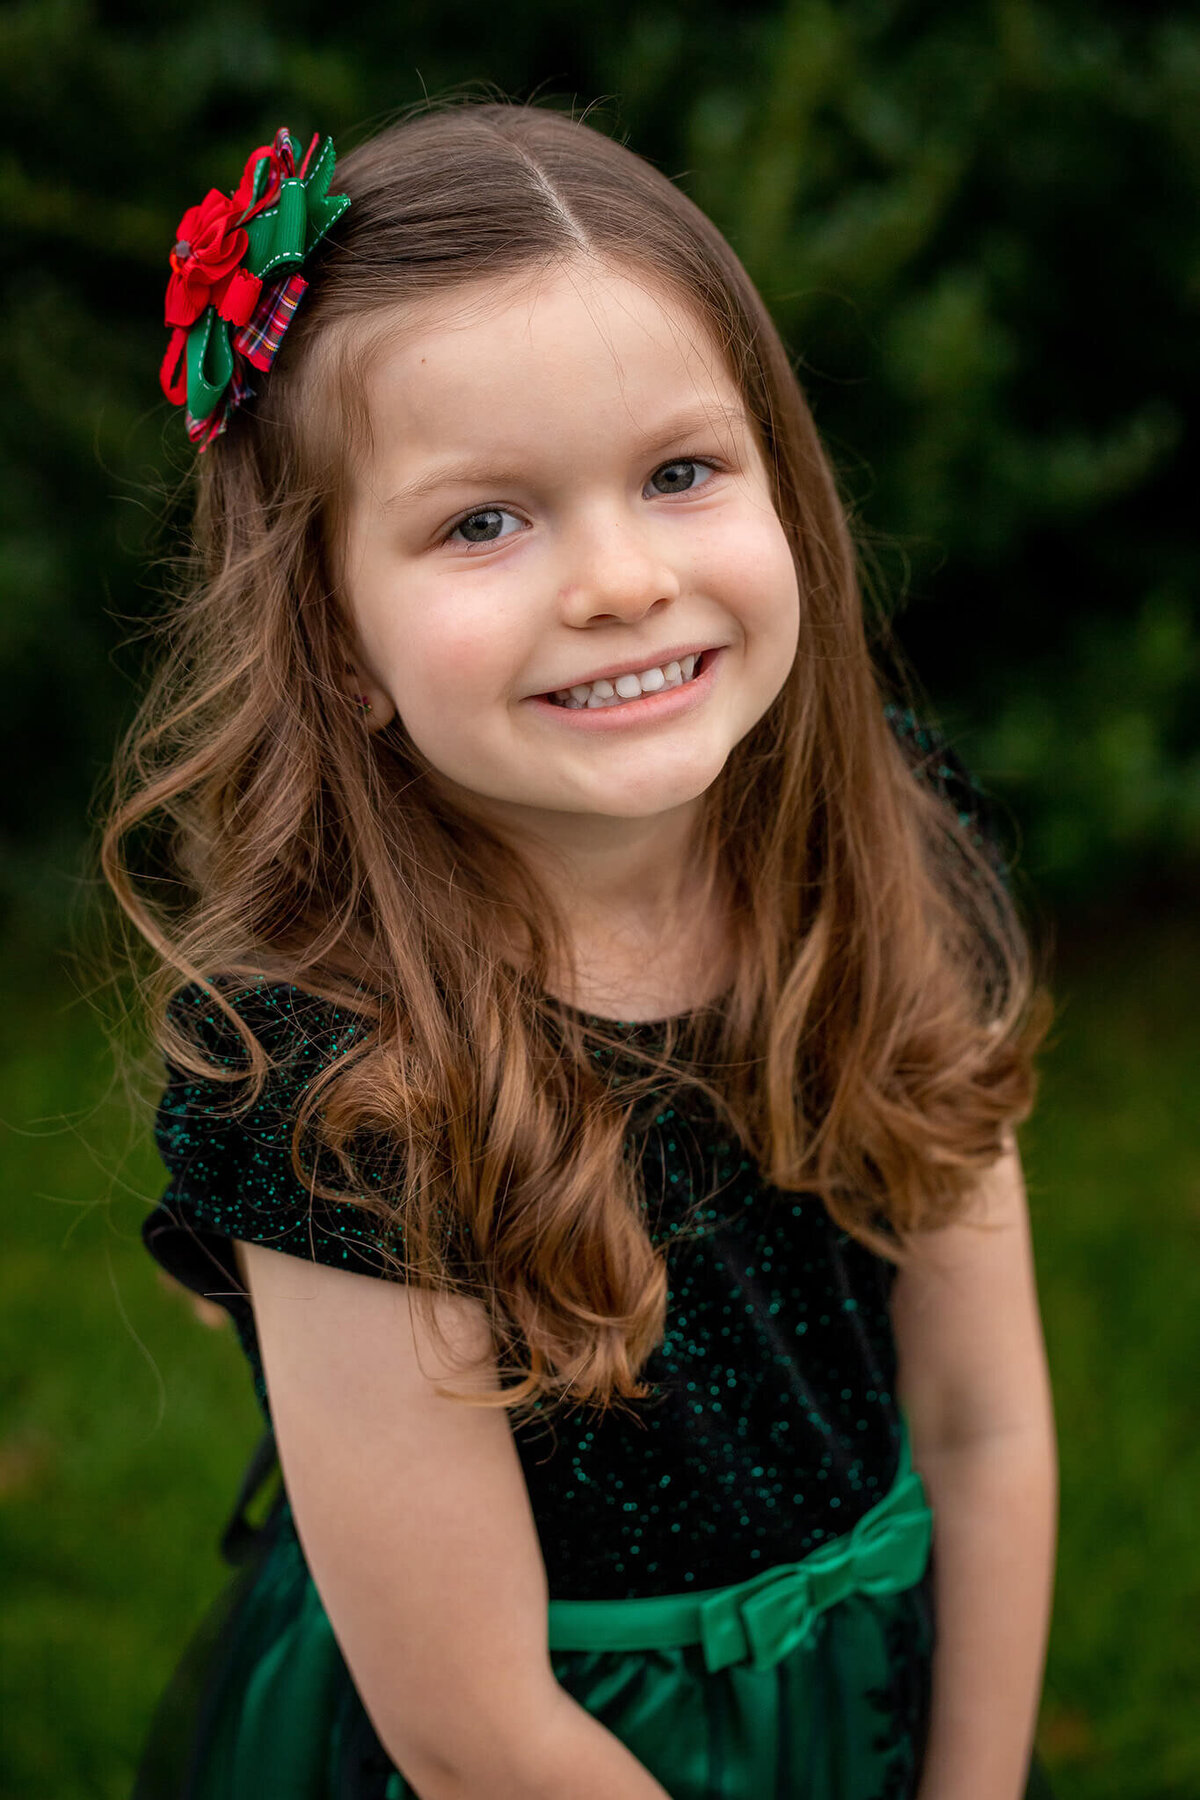 A Christmas picture of my daughter in a nice green dress and a Christmas bow in her hair.